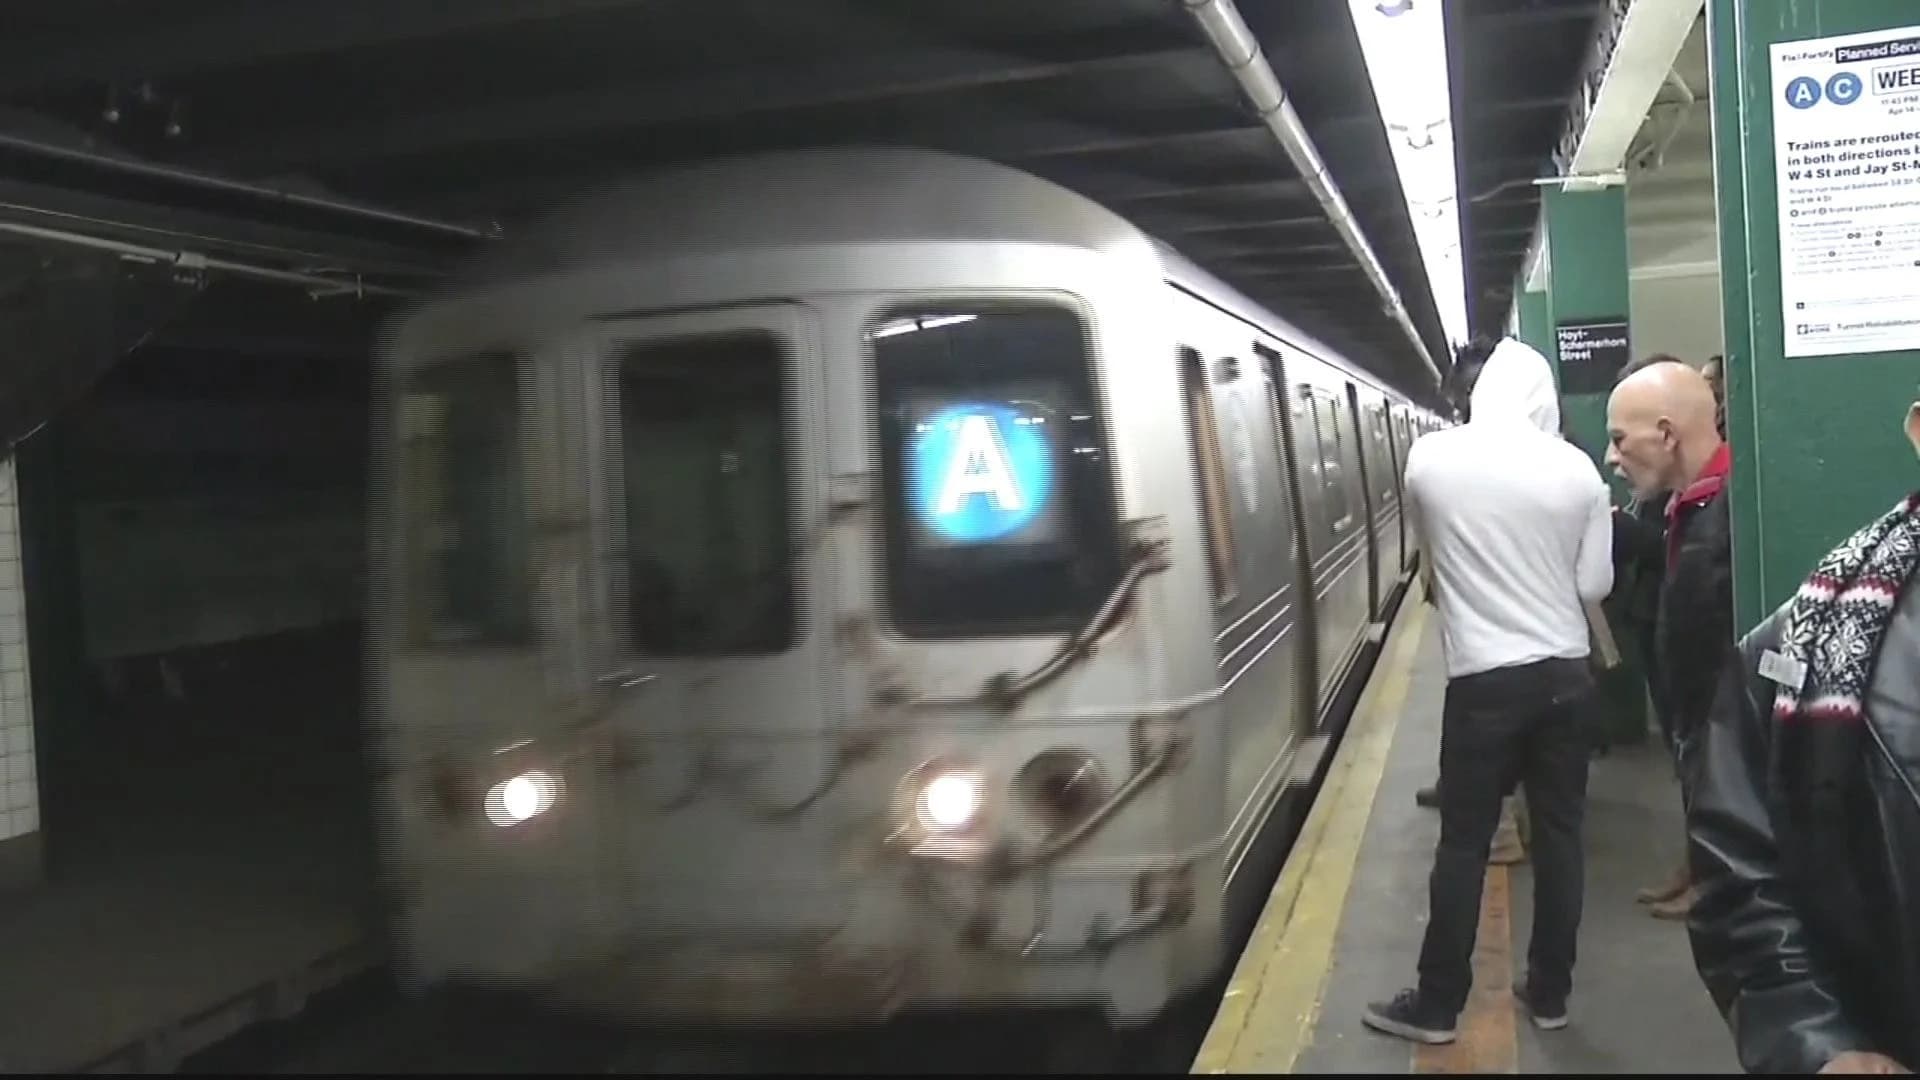 Massive delays, cancellations plague NYC subway system during power outage